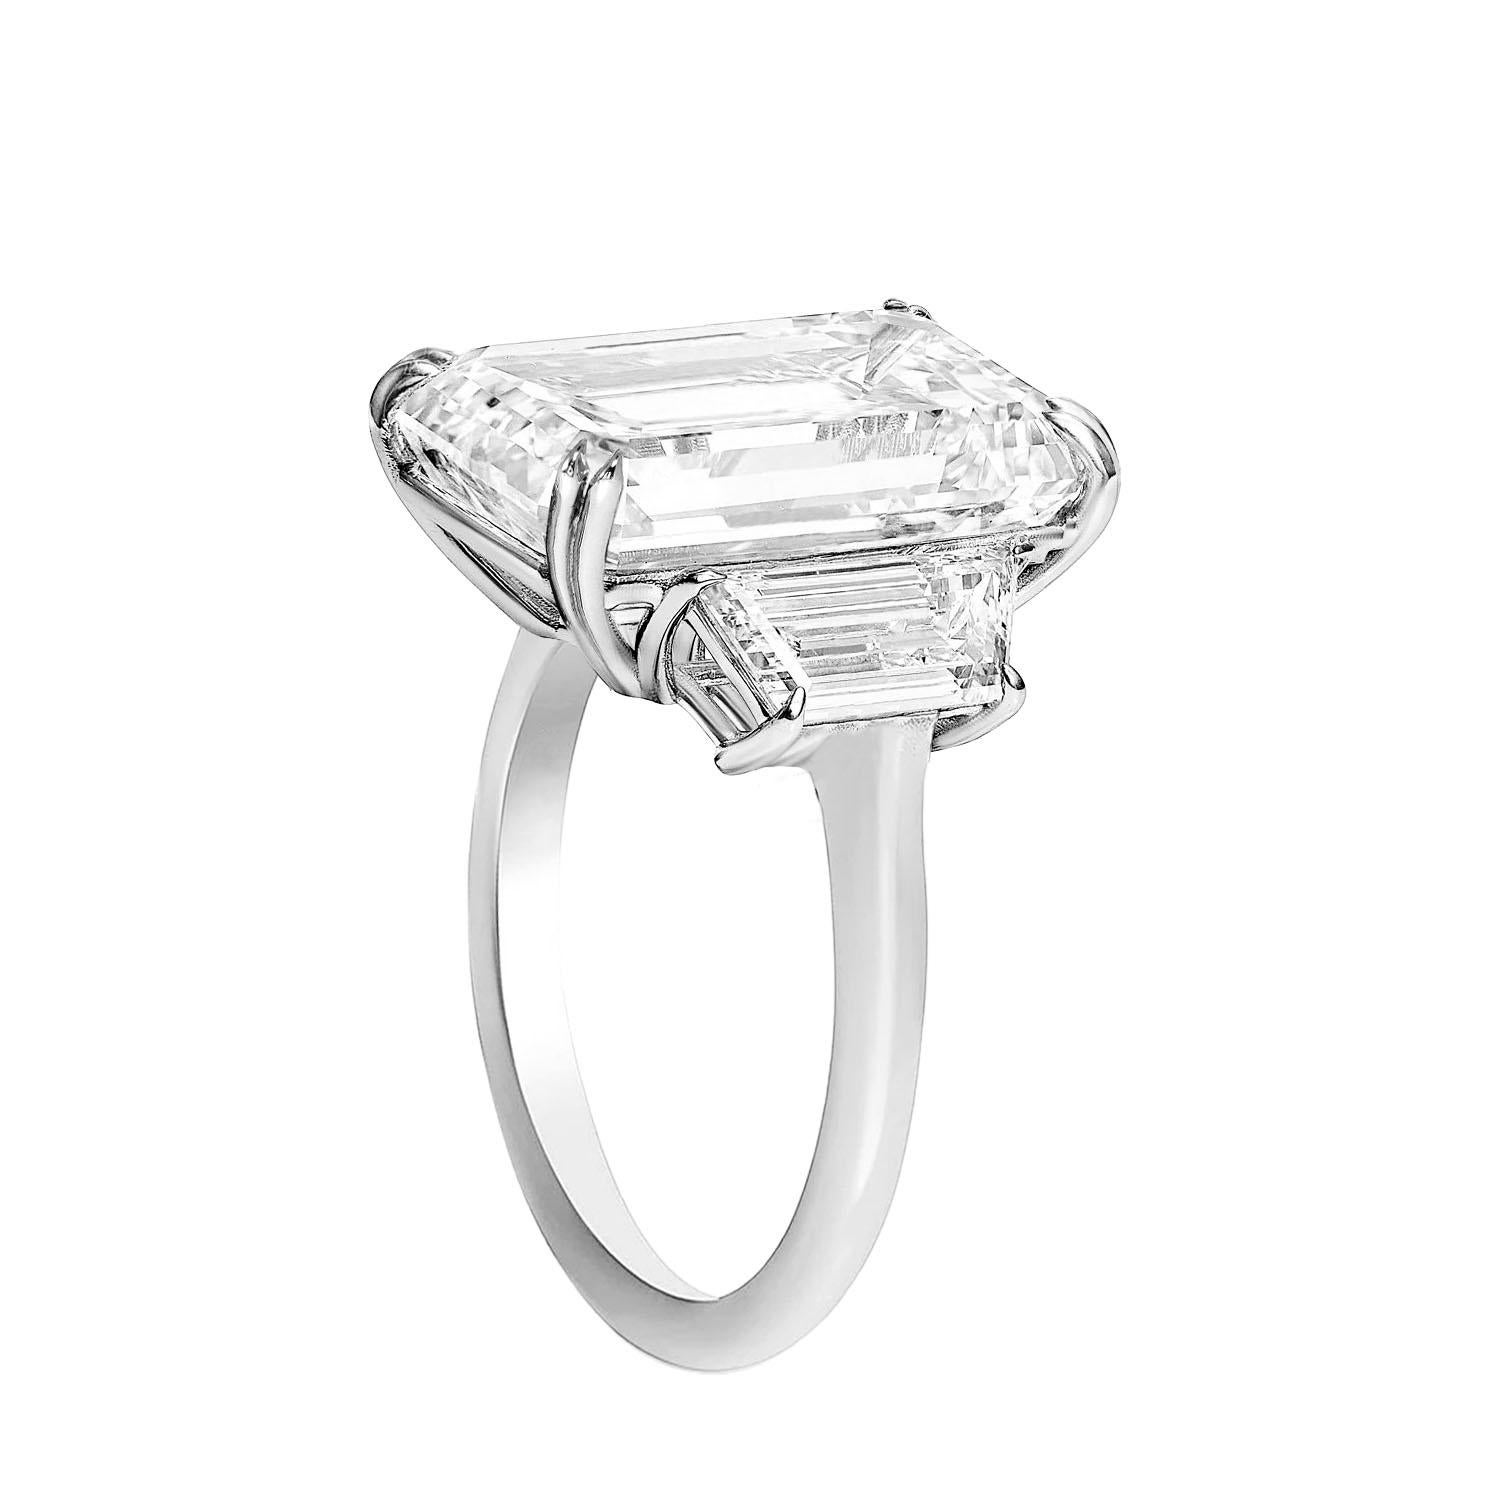 GIA Certified Golconda Type IIA 12 Carat Emerald Cut Diamond Ring! 🌟

Step into a world of unparalleled rarity and elegance with our extraordinary creation featuring a GIA certified Golconda Type IIA diamond, boasting a magnificent 12